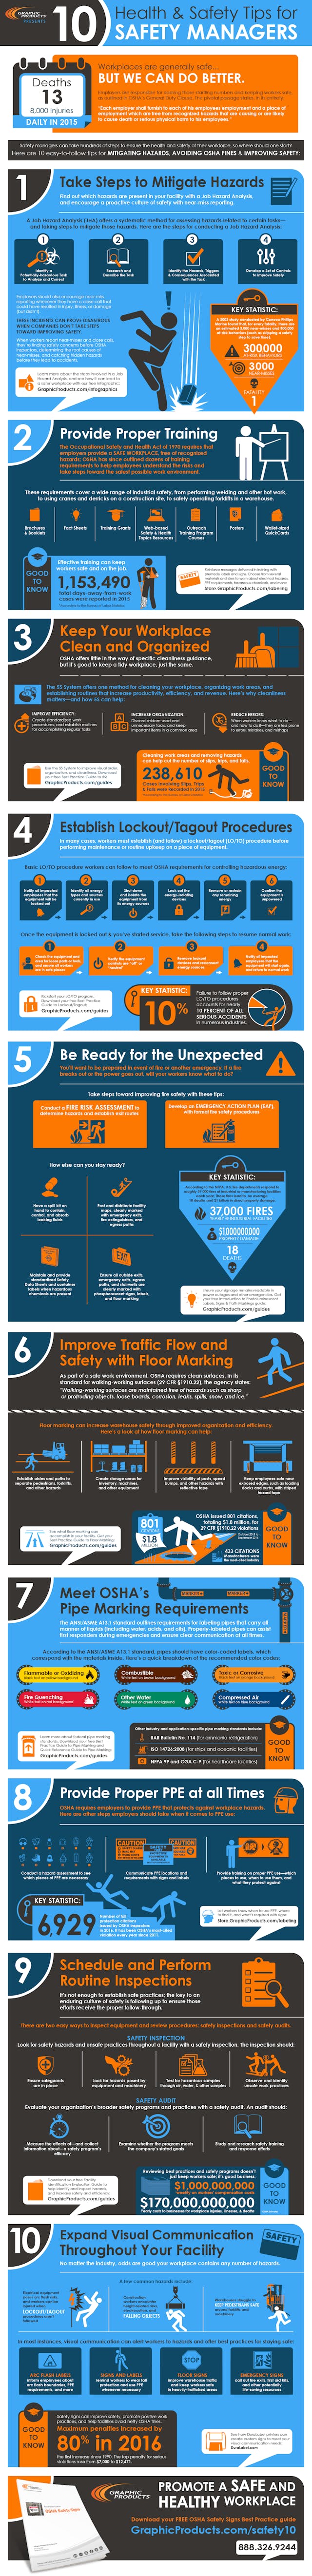 Ehstoday Com Sites Ehstoday com Files Uploads 10 Health Safety Tips Safety Managers Infographc